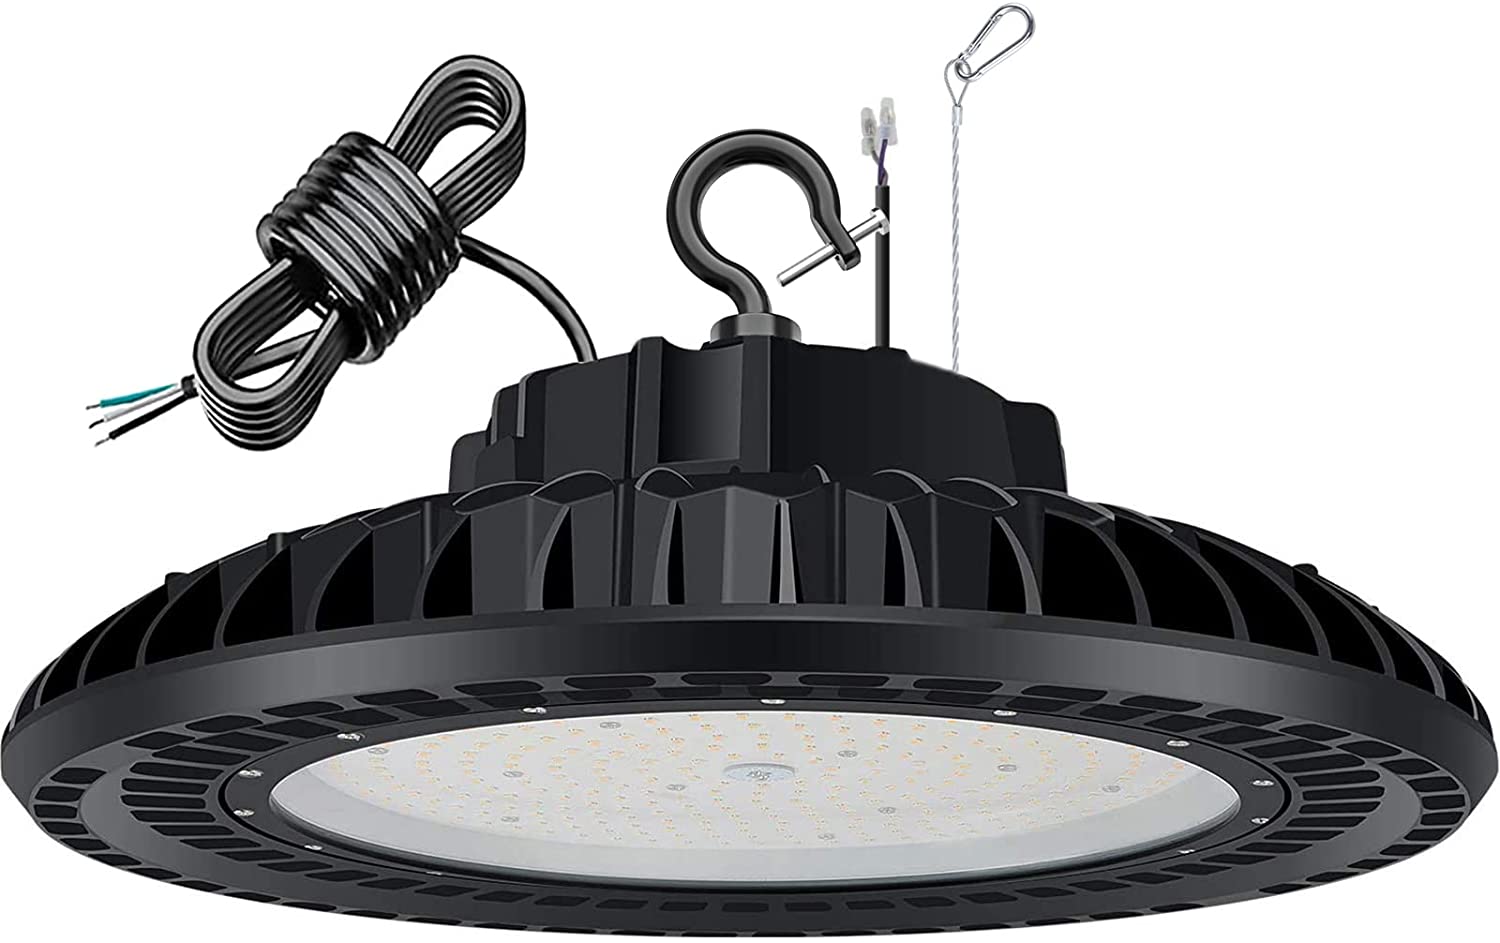 100W UFO LED High Bay Light Free Shipping from USA/CA 0-10V Dimmable